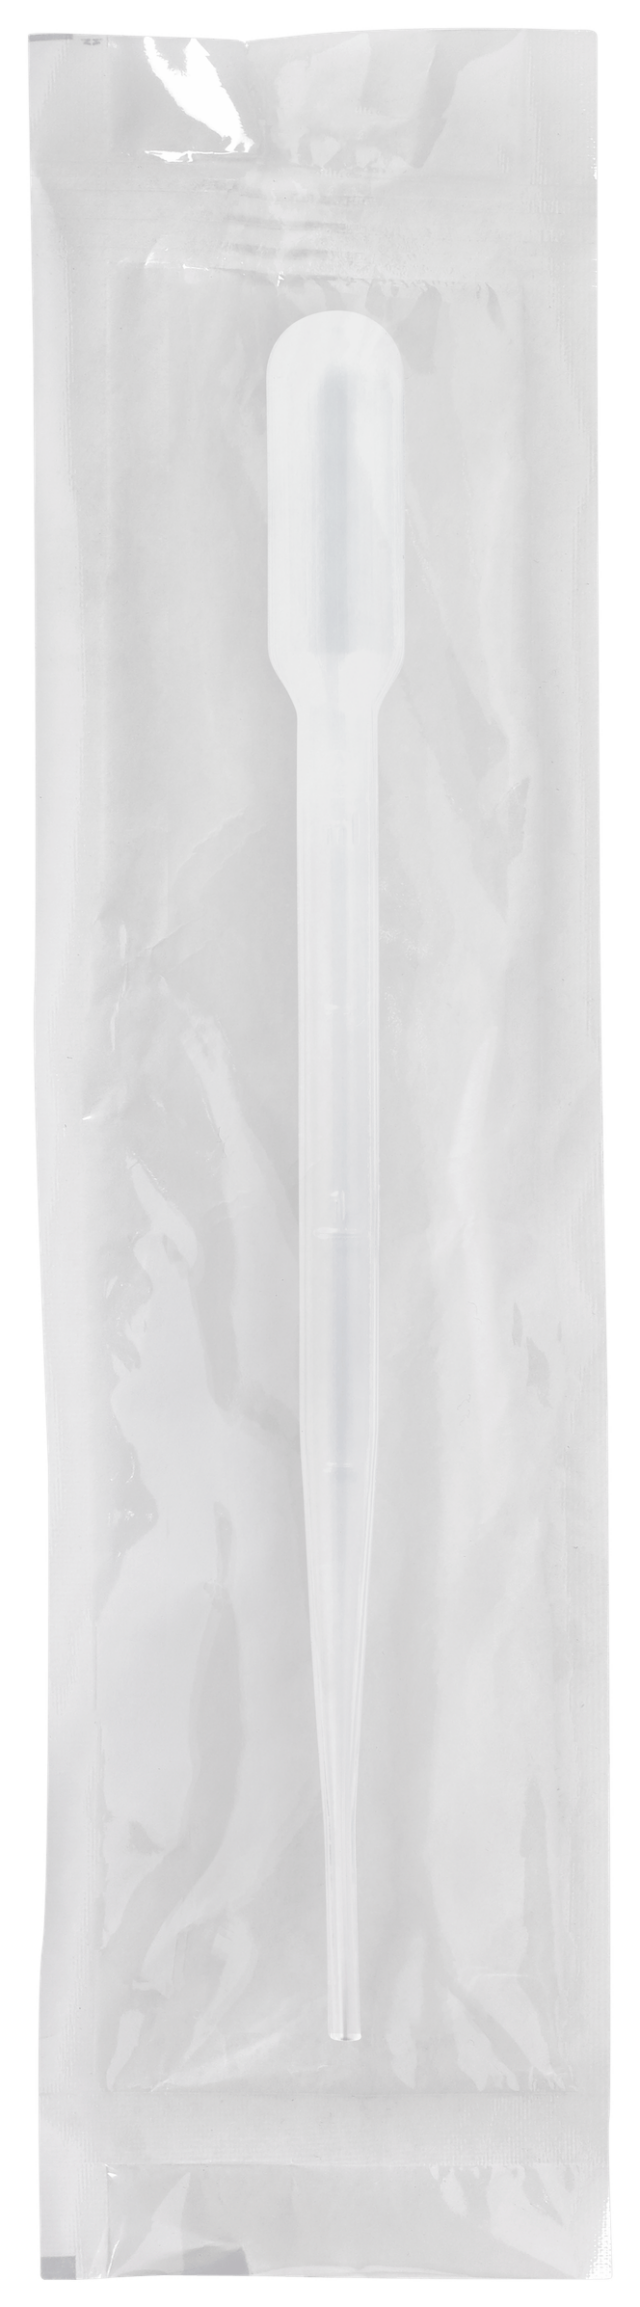 155mm Disposable Transfer Pipet for Blood Bank Graduated Up to 2 mL at 0.5 mL Intervals with 2.4 mL Bulb Draw and 22 drops/mL - Individually Wrapped, Sterile